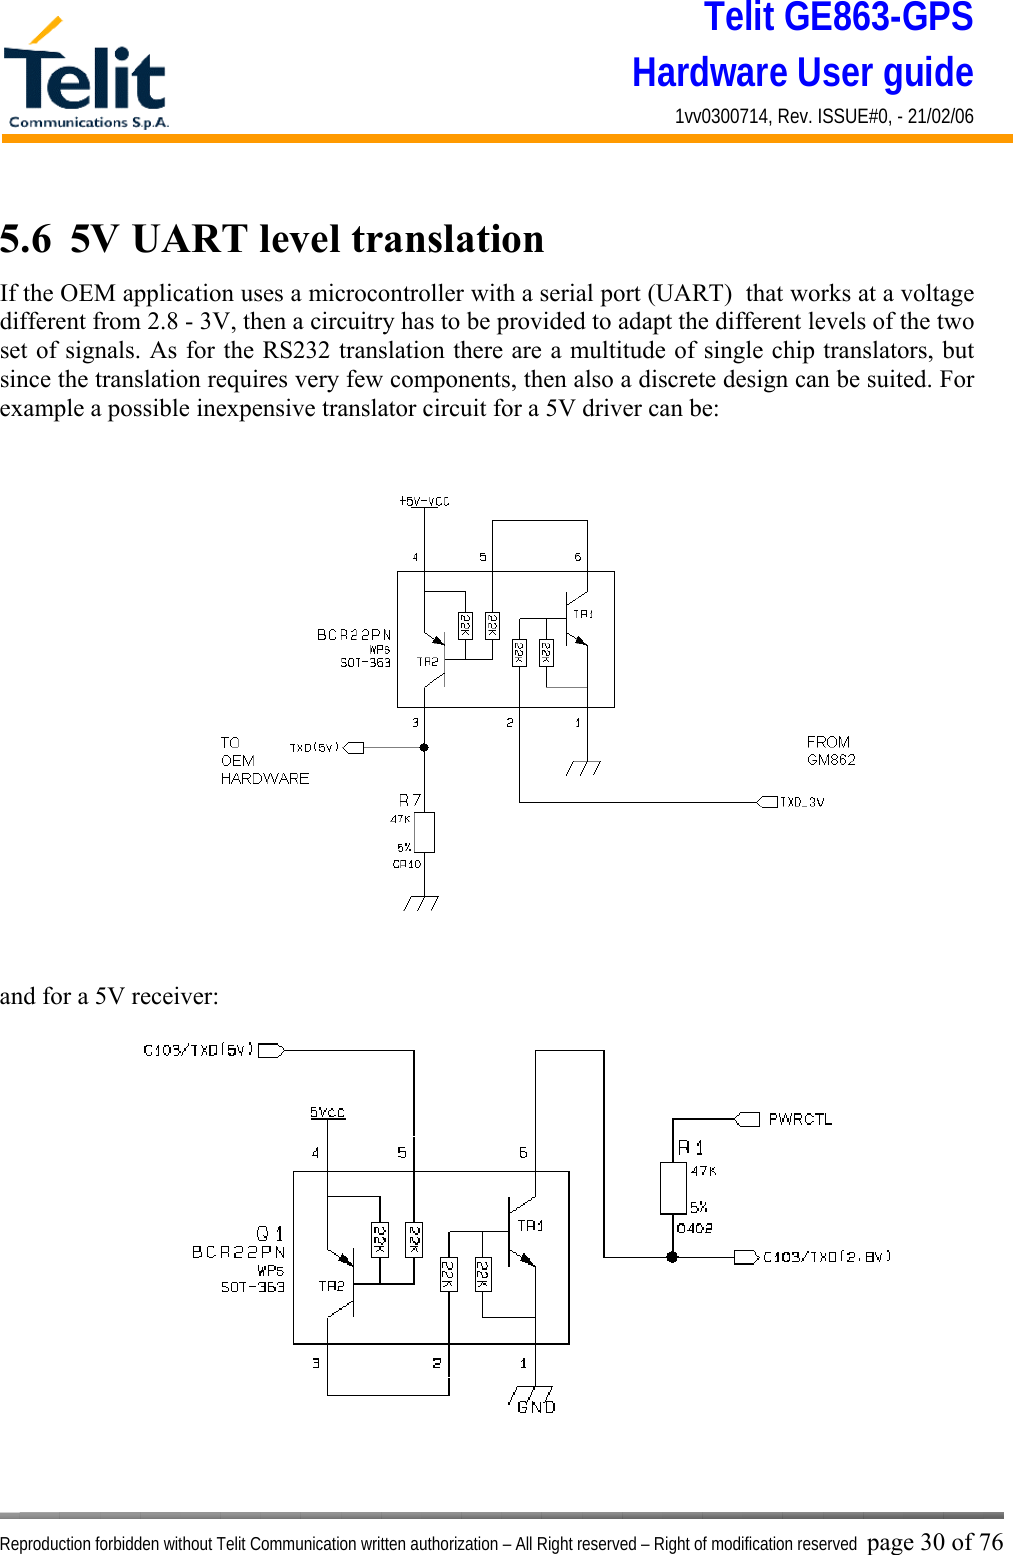 Telit GE863-GPS Hardware User guide 1vv0300714, Rev. ISSUE#0, - 21/02/06    Reproduction forbidden without Telit Communication written authorization – All Right reserved – Right of modification reserved page 30 of 76 5.6  5V UART level translation If the OEM application uses a microcontroller with a serial port (UART)  that works at a voltage different from 2.8 - 3V, then a circuitry has to be provided to adapt the different levels of the two set of signals. As for the RS232 translation there are a multitude of single chip translators, but since the translation requires very few components, then also a discrete design can be suited. For example a possible inexpensive translator circuit for a 5V driver can be:   and for a 5V receiver:  